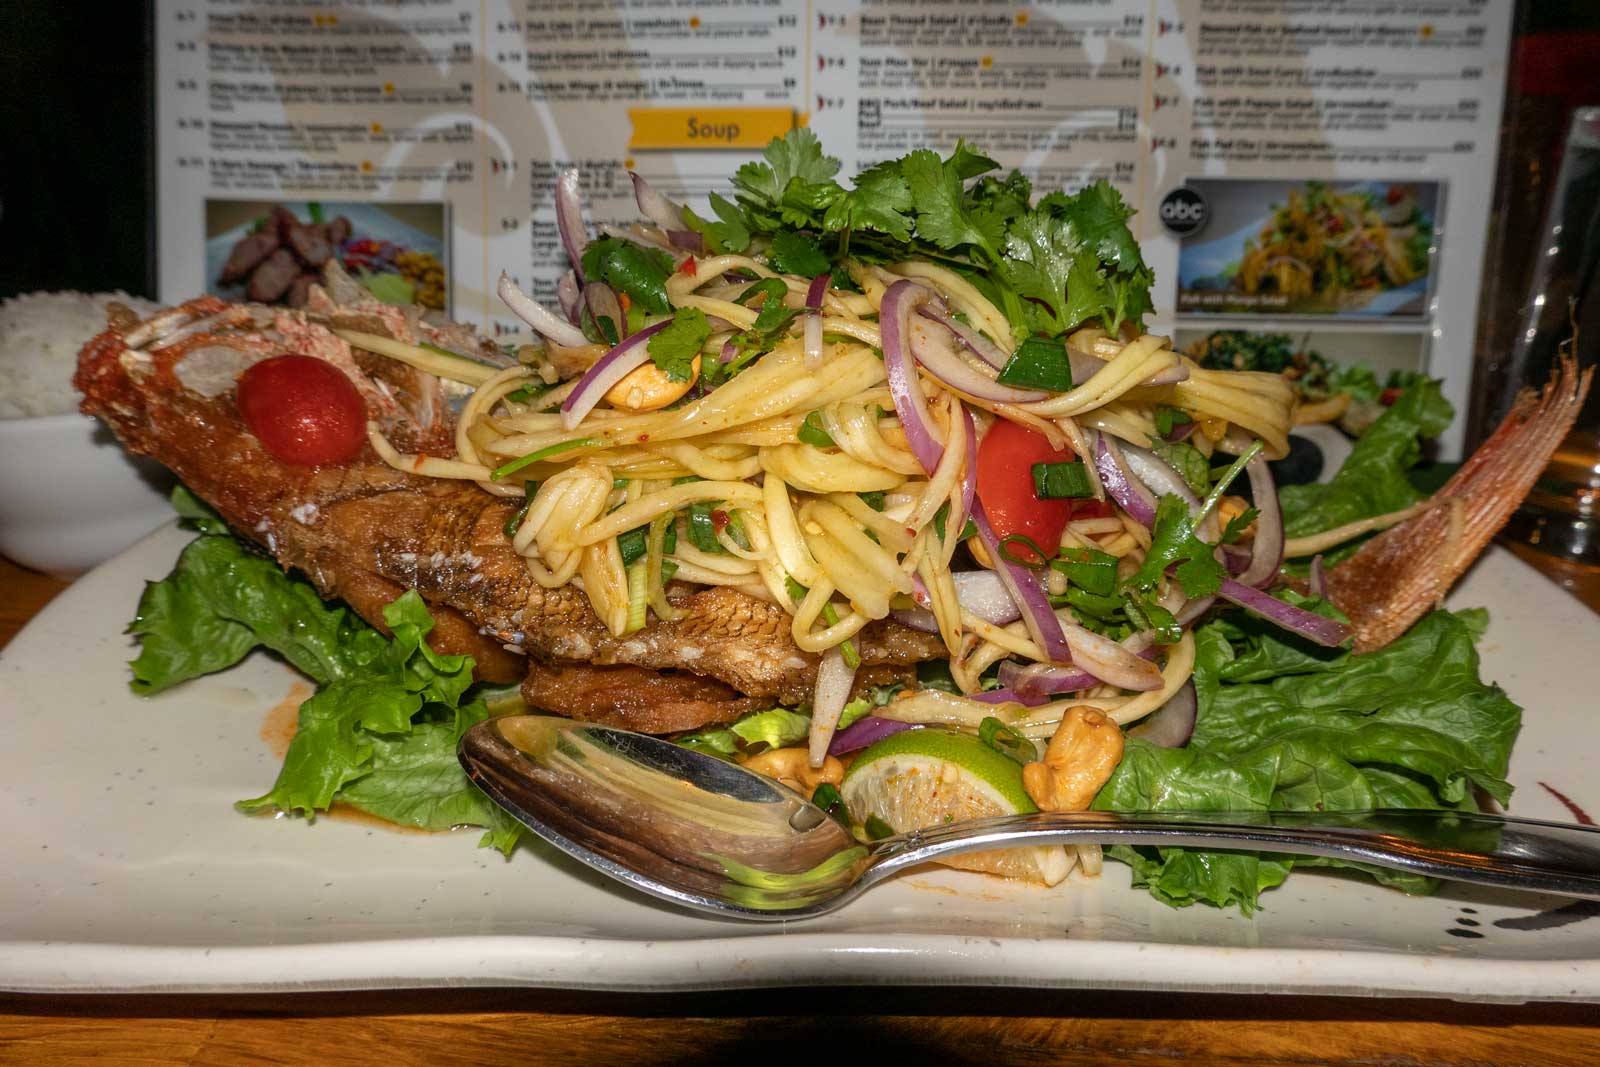 Fried-red-snapper-topped-with-mango-salad